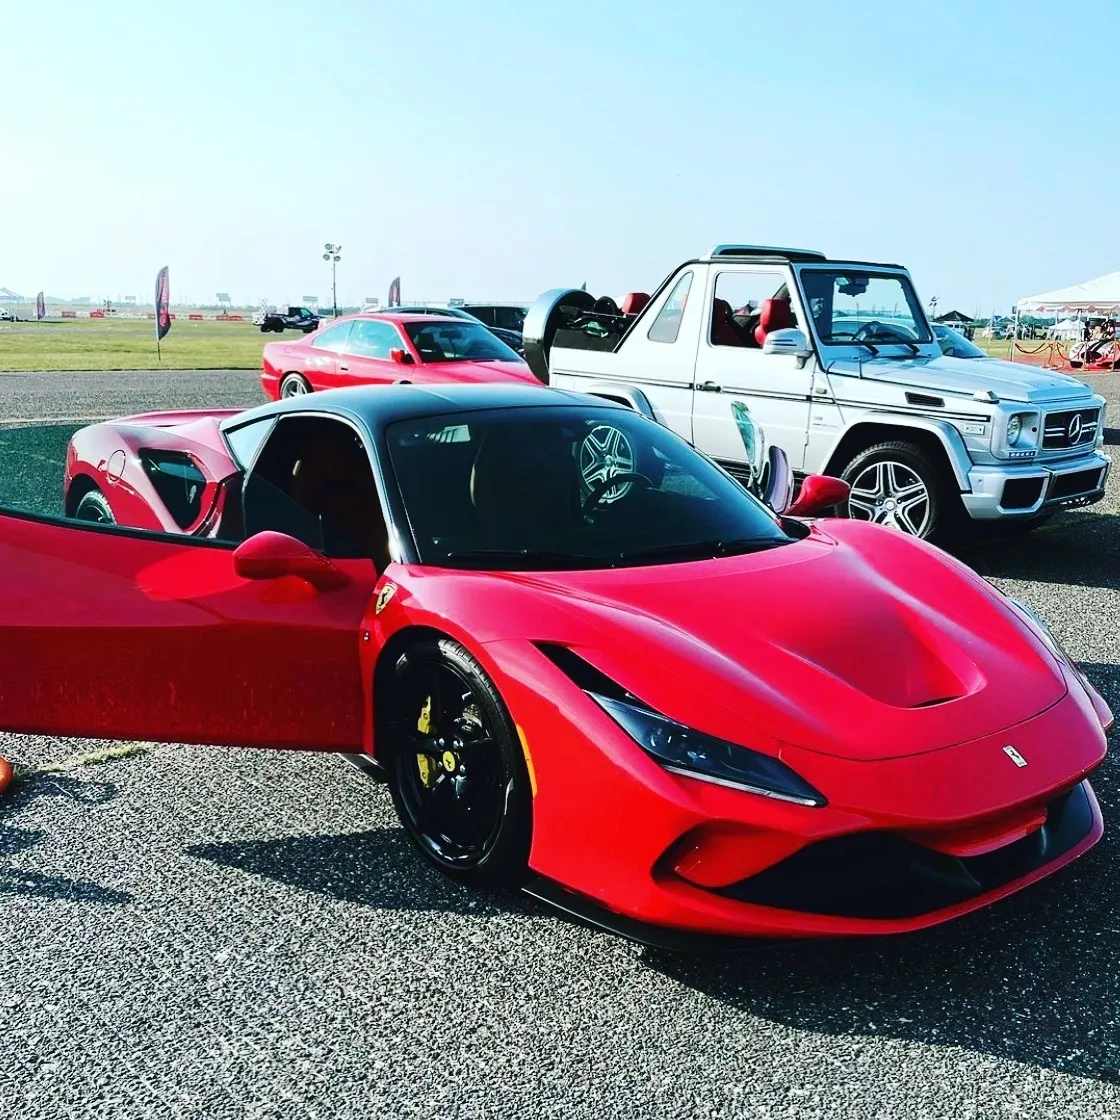 A shining trio of exotic vehicles showcasing speed, style, and meticulous auto detailing, with a sleek red sports car in the foreground, another futuristic model behind it, and a rugged luxury SUV completing the scene